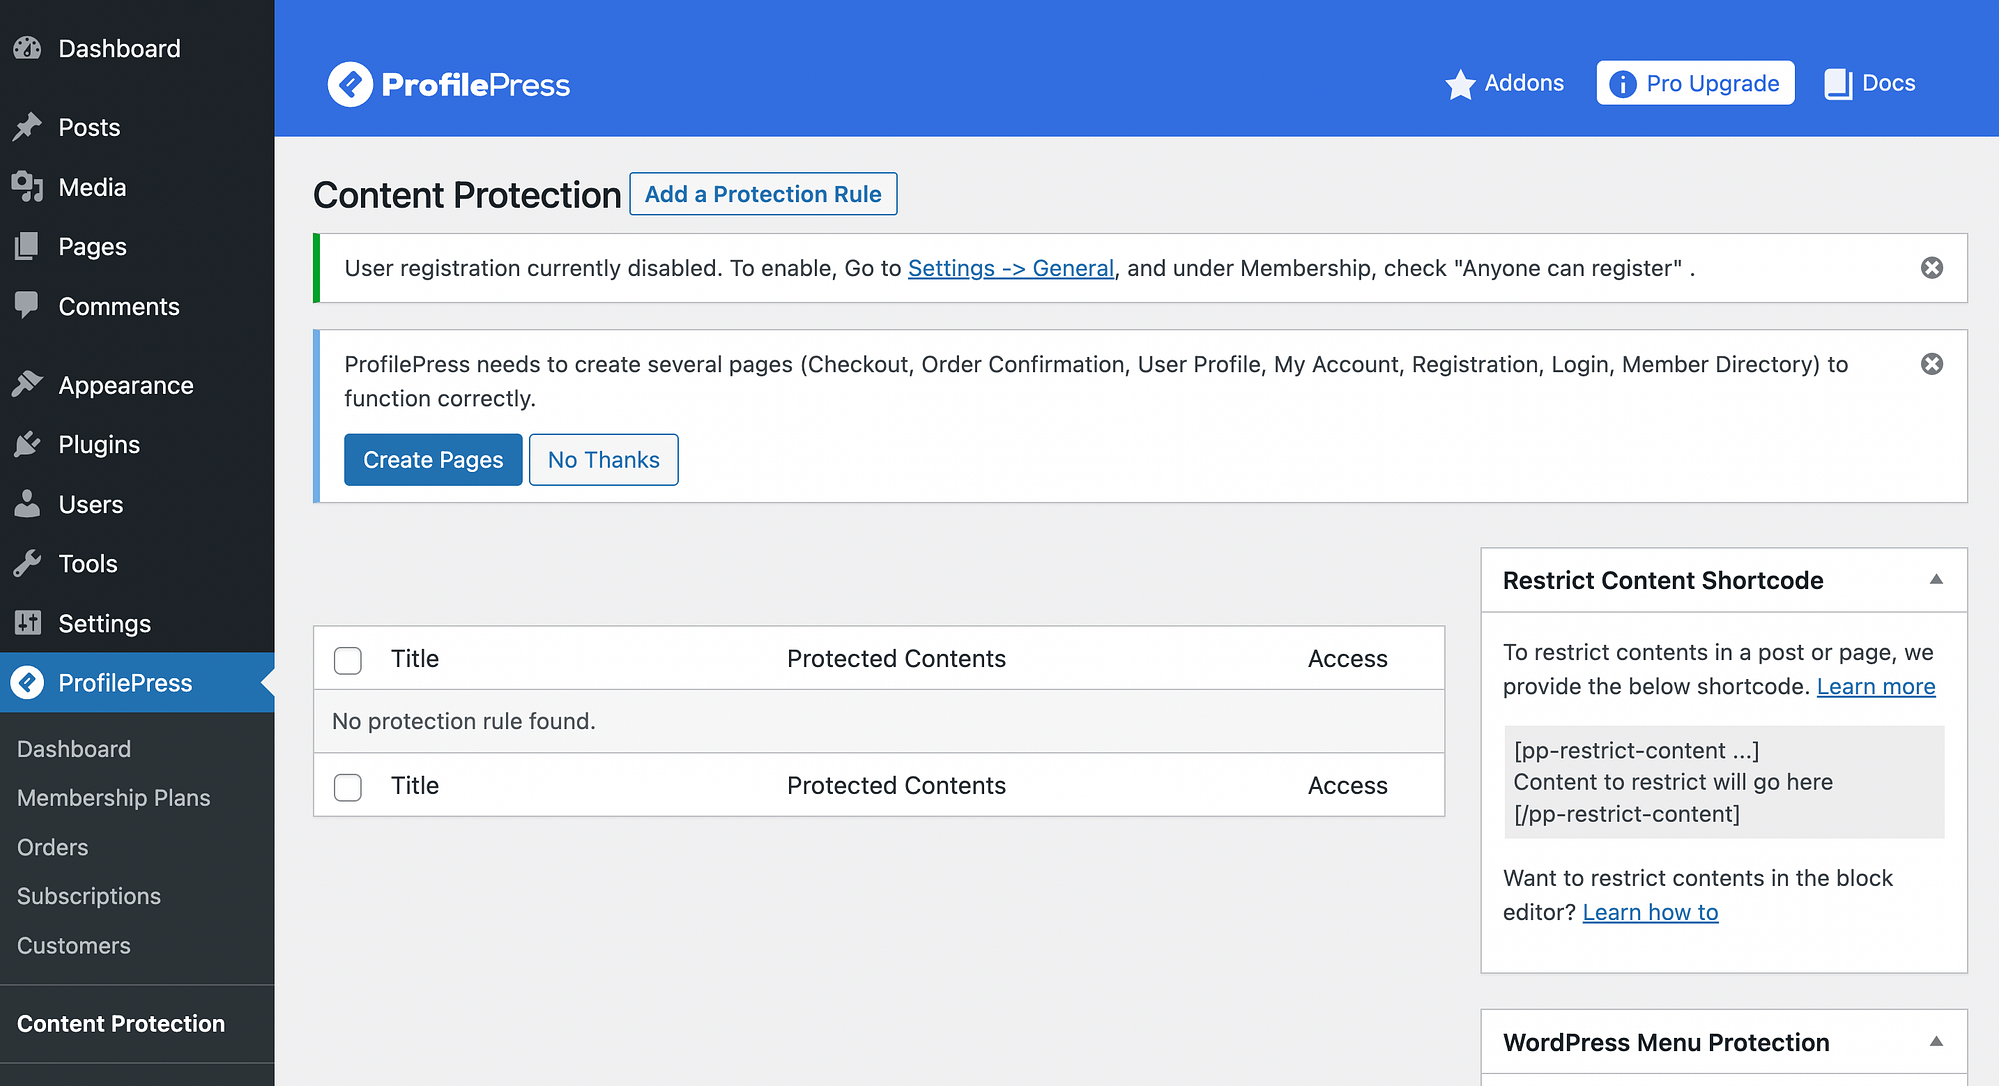 Adding a protection rule in ProfilePress to restrict content in WordPress.